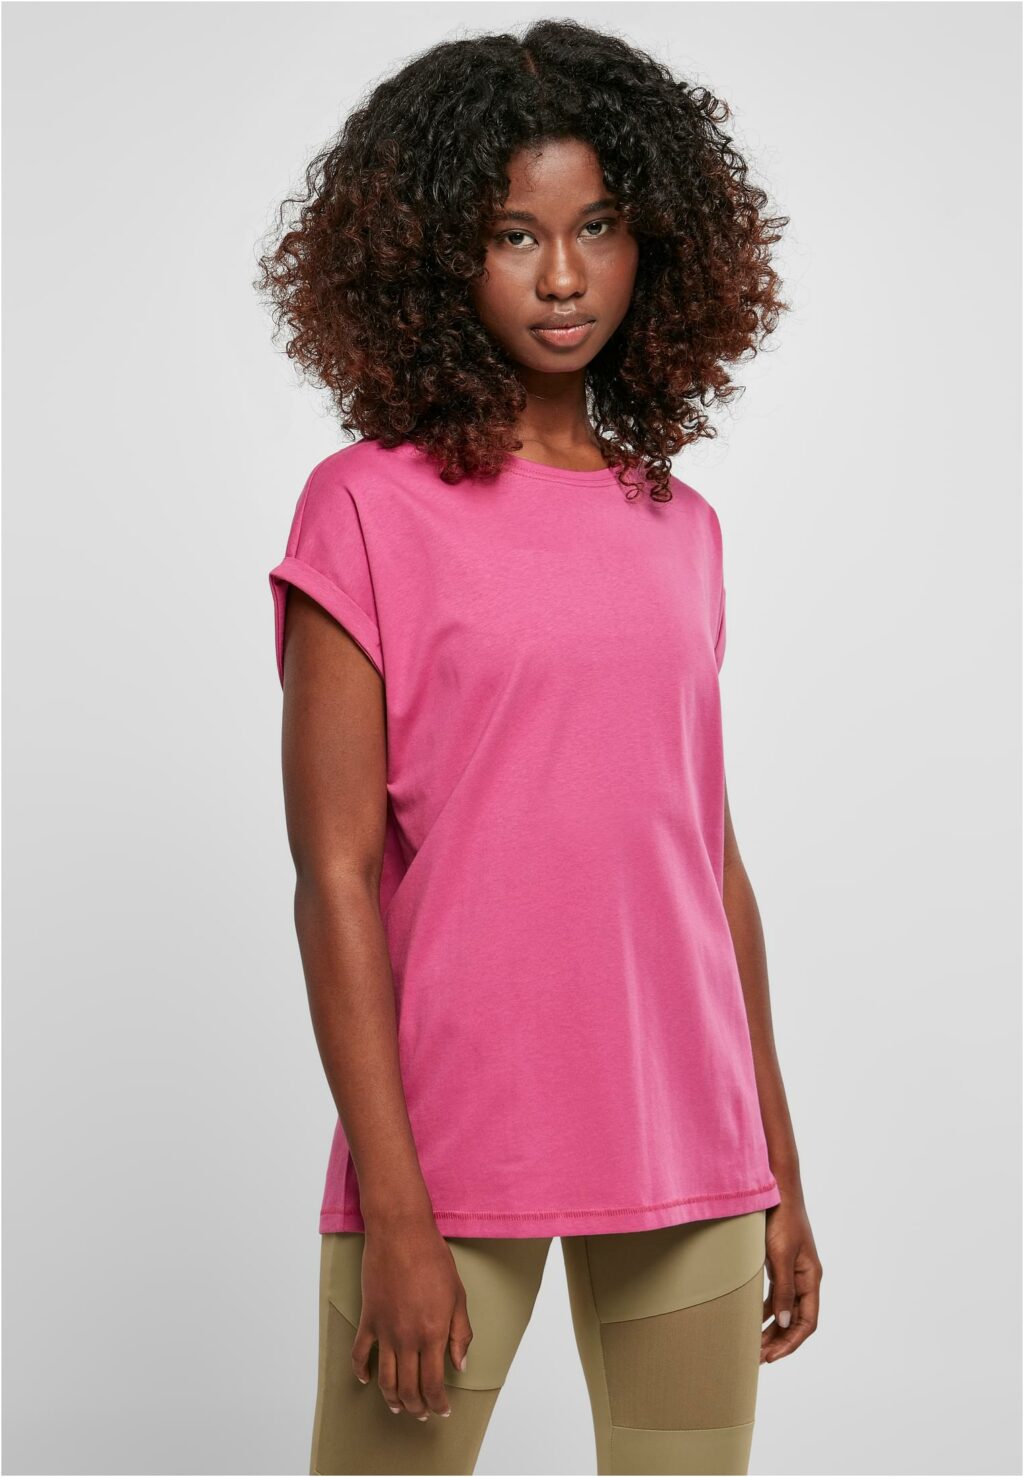 Urban Classics Ladies Extended Shoulder Tee brightviolet TB771